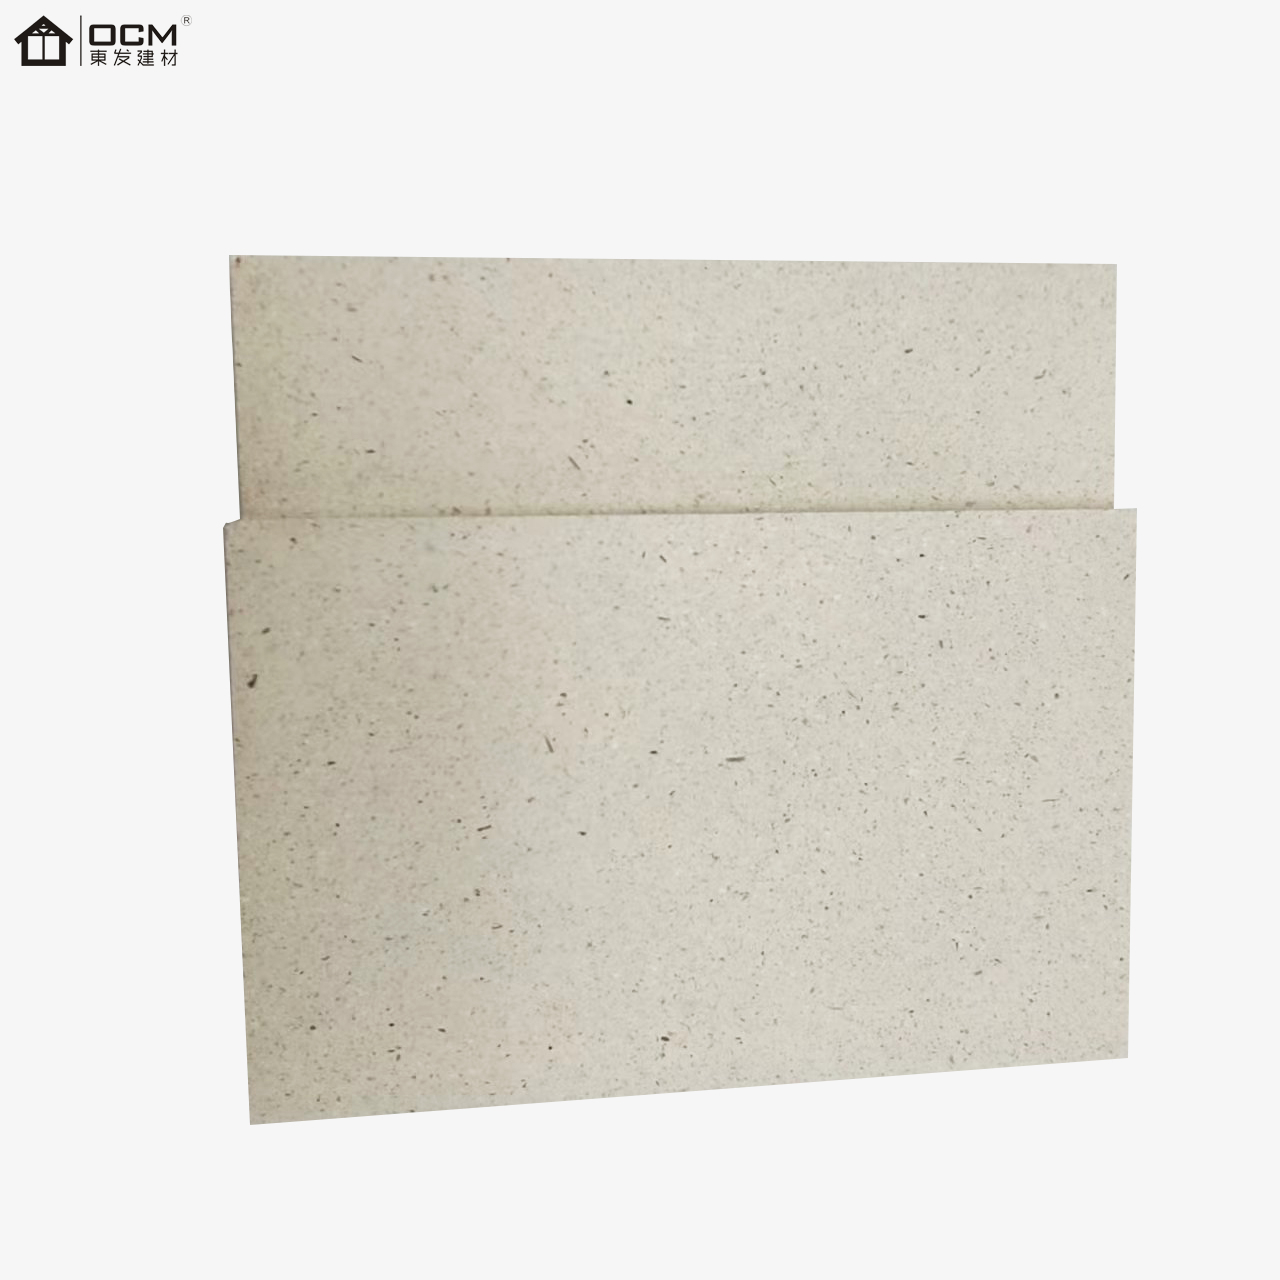 Square Edge Cheap Fireproof Sanded Magnesium Oxide Board Price